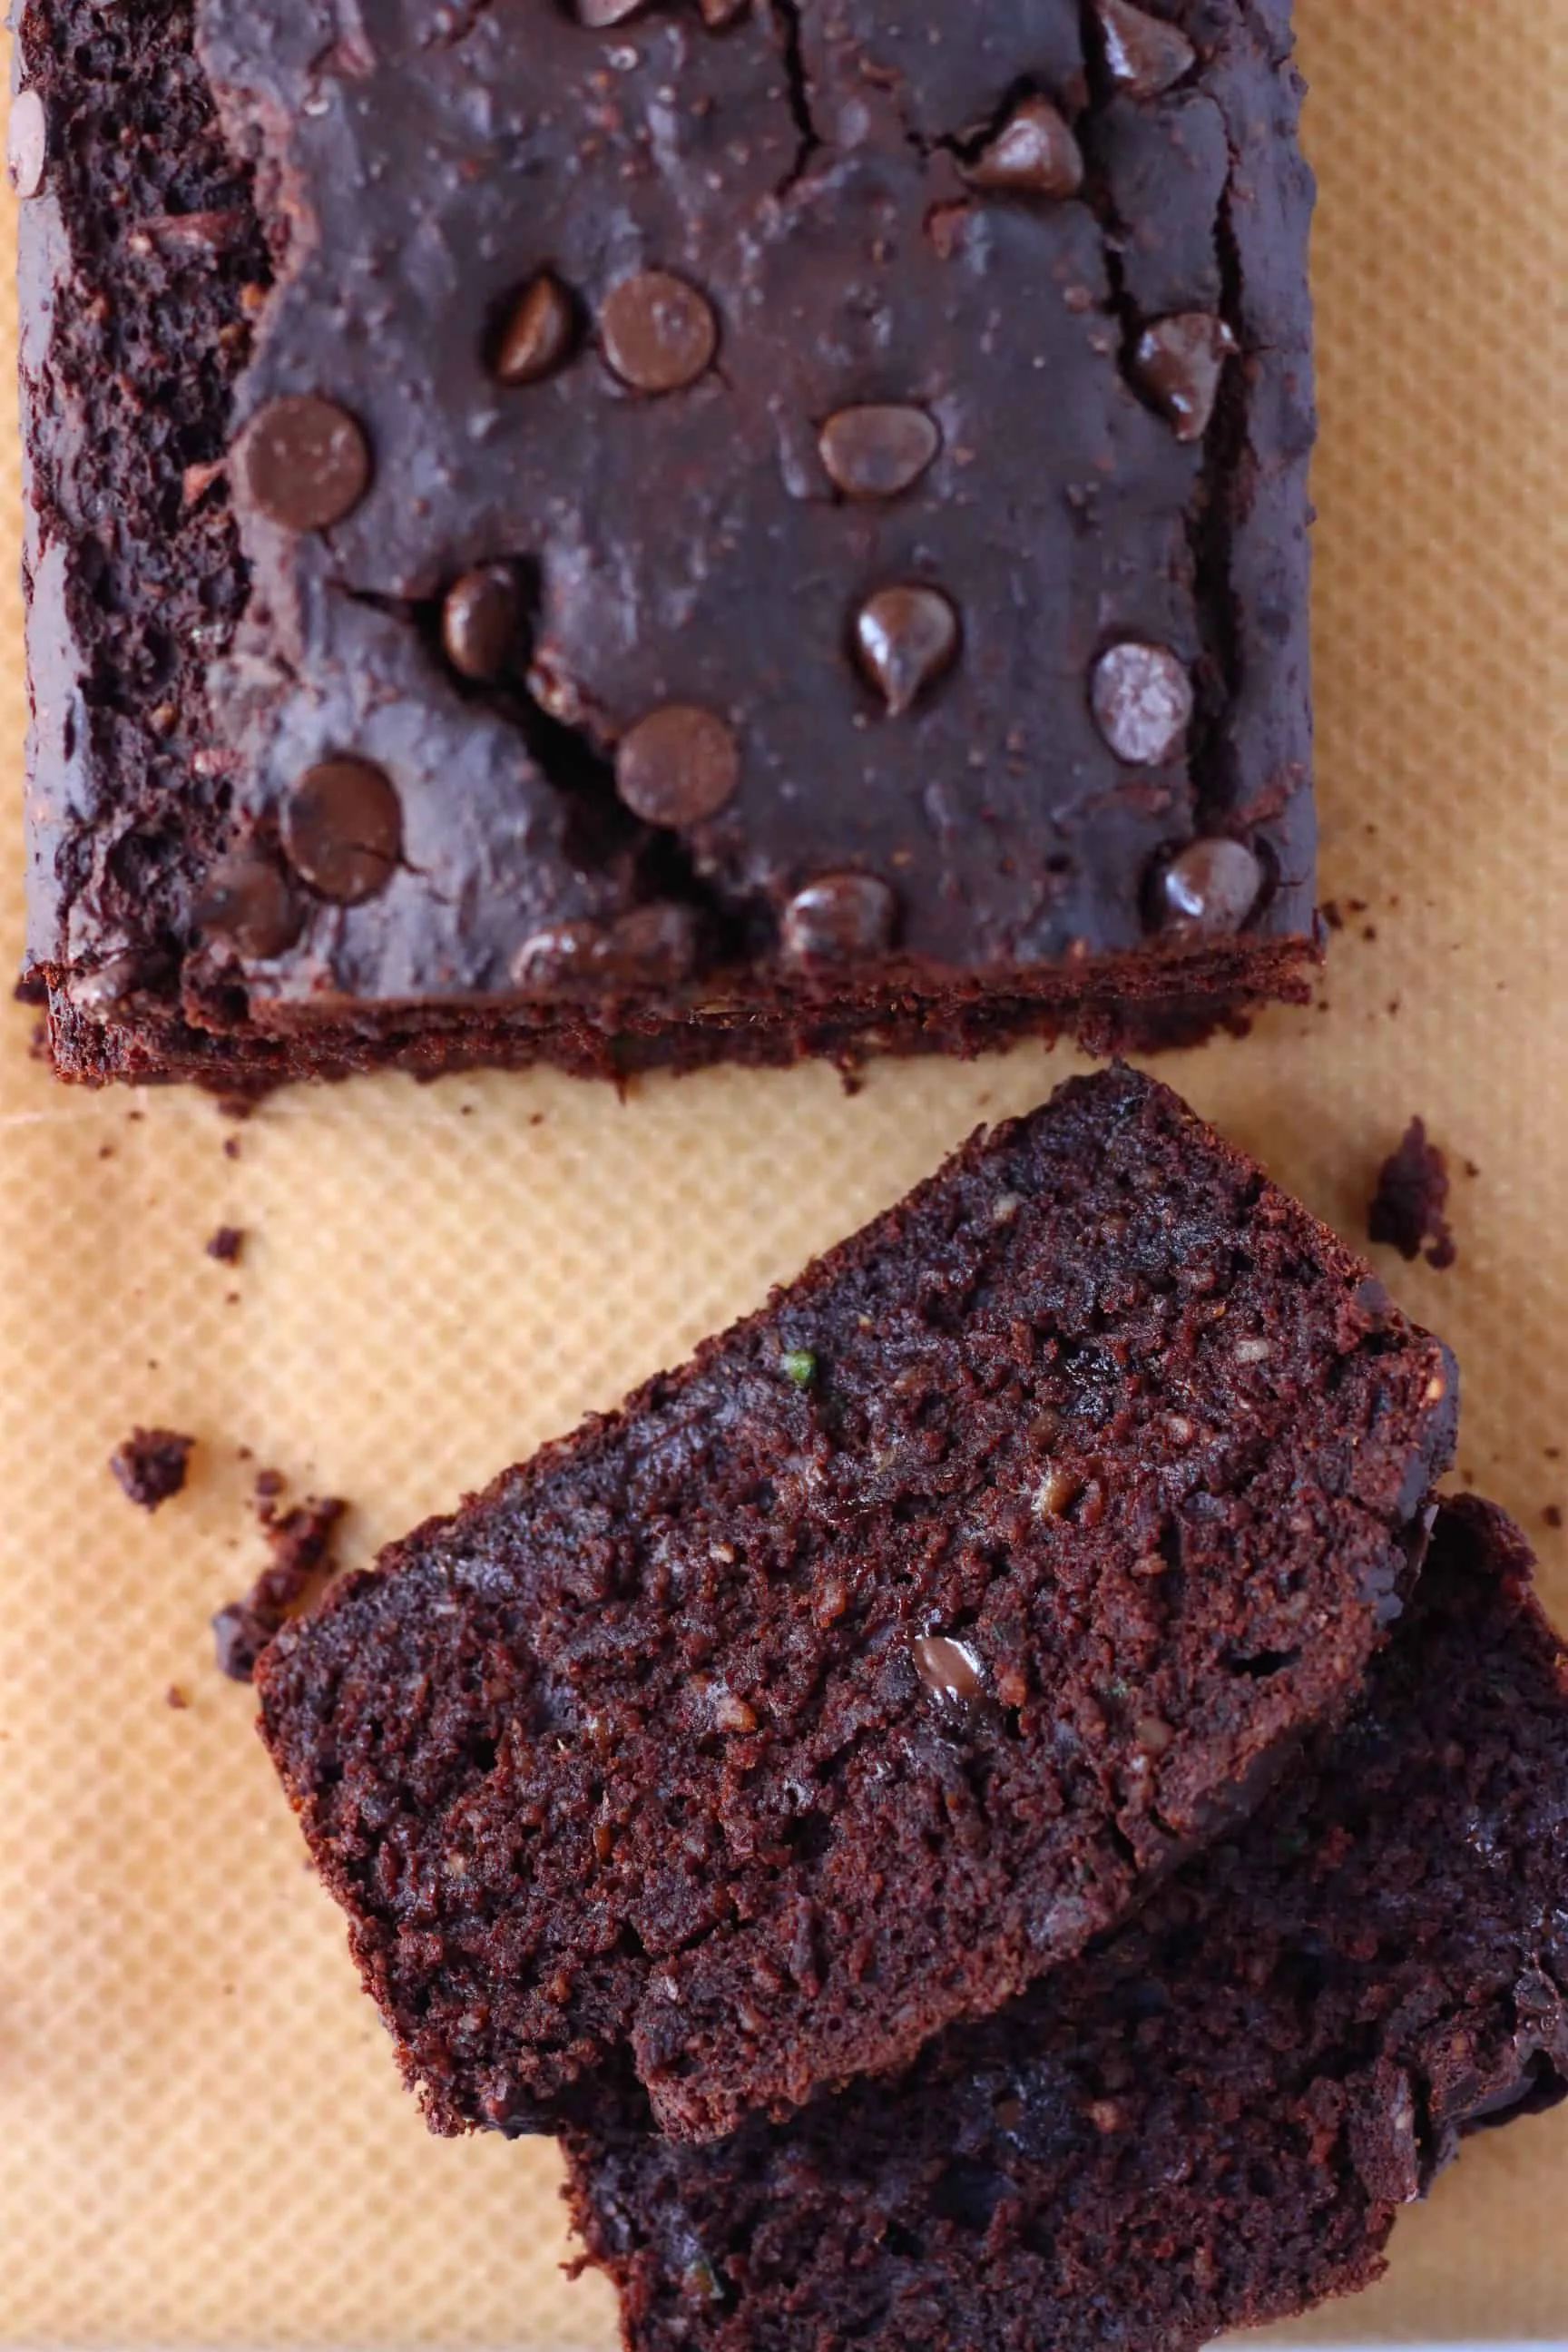 A loaf of gluten-free vegan chocolate zucchini bread studded with chocolate chips with two slices next to it